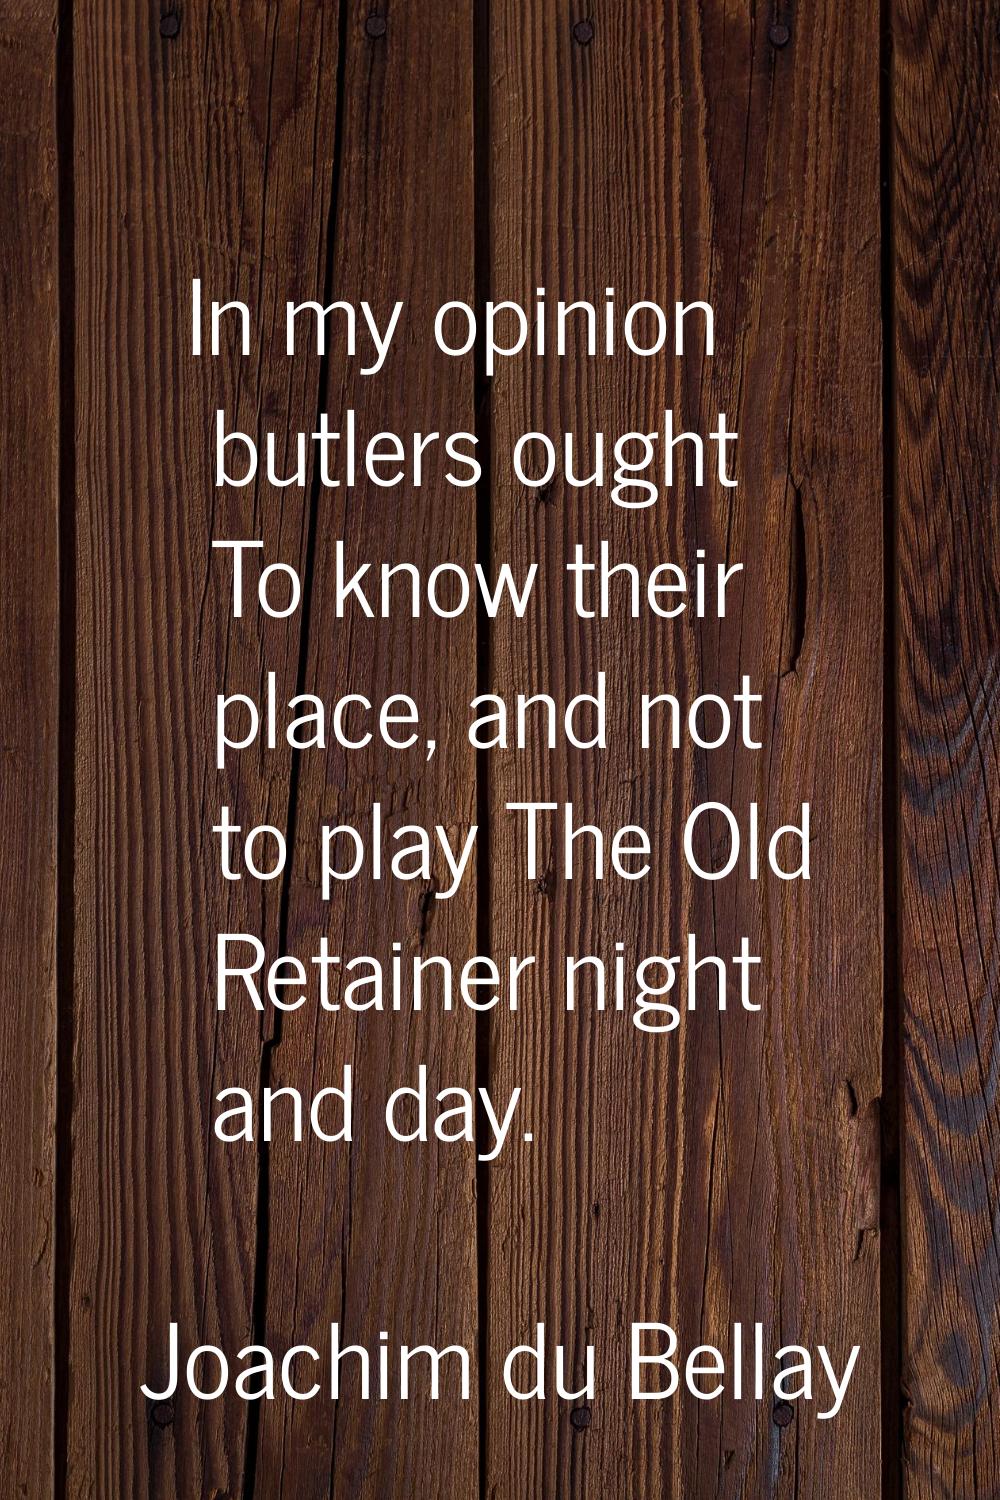 In my opinion butlers ought To know their place, and not to play The Old Retainer night and day.